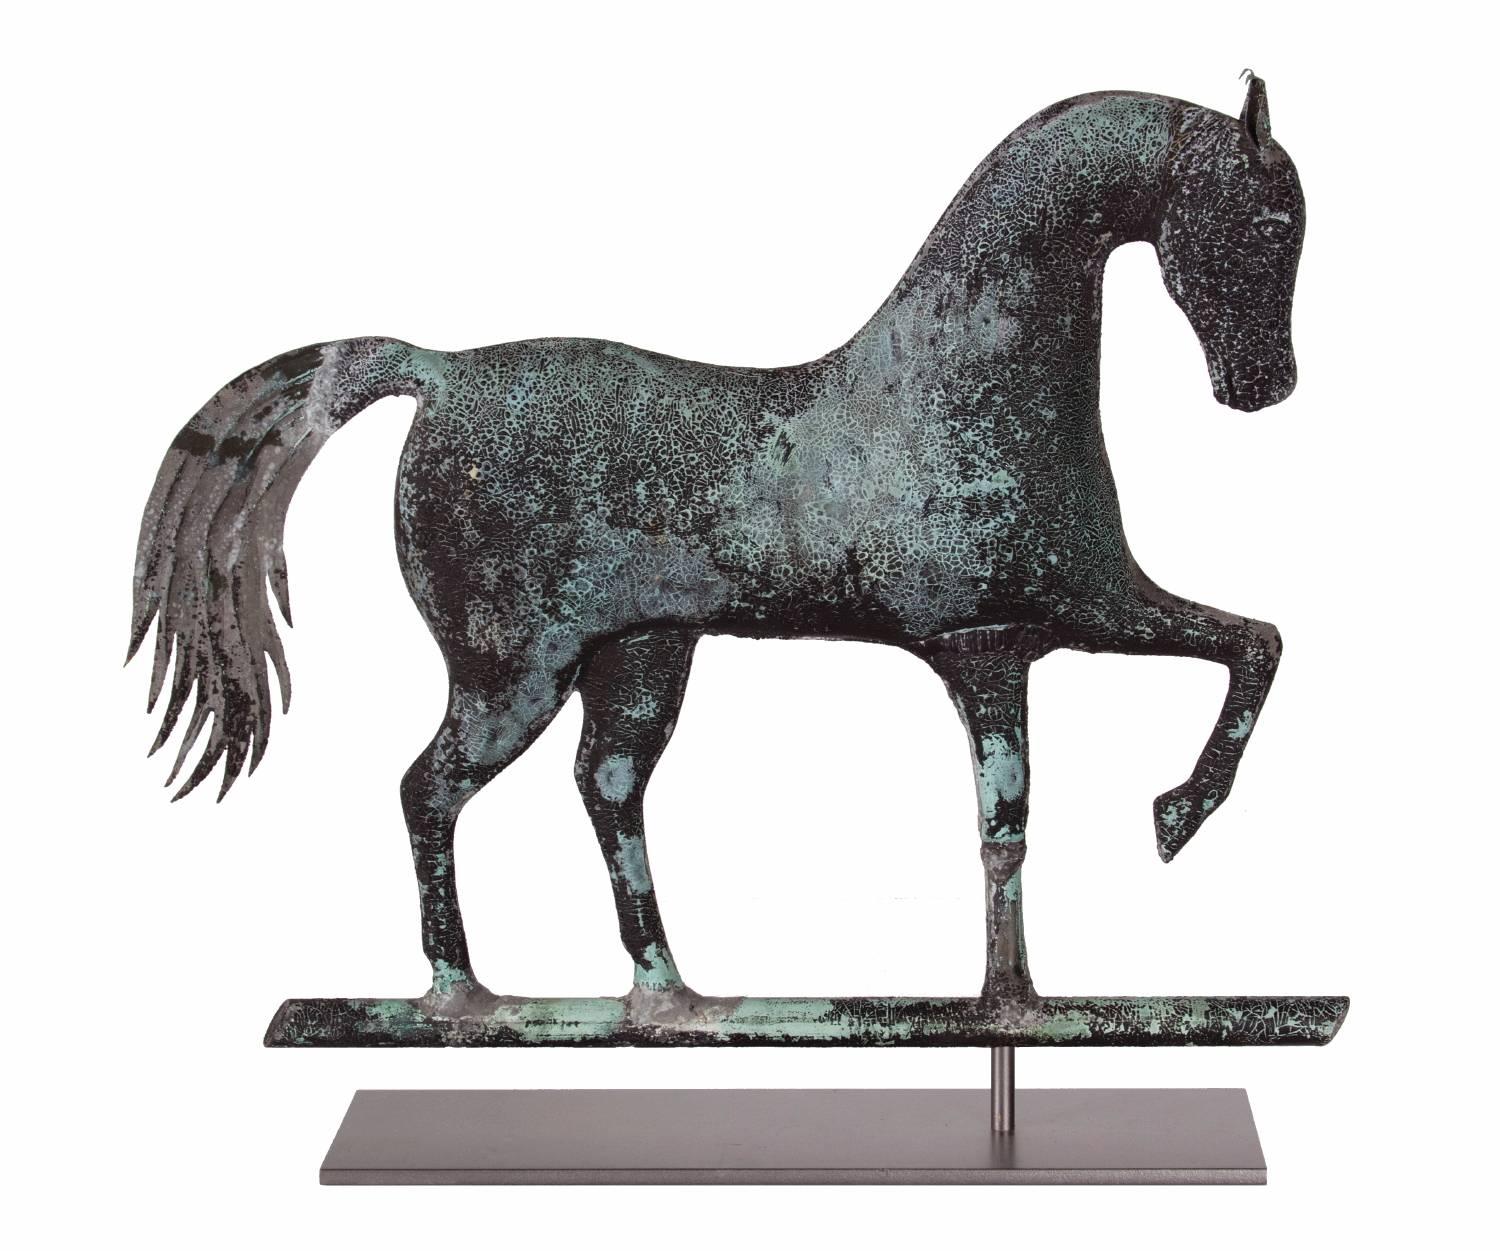 Prancing horse weathervane, attributed to Jewel & Co. Waltham, Massachusetts, circa 1860:

Prancing horse weathervane by A.H. Jewell & Co., Waltham, MA. Made of molded copper with a cast zinc head, applied copper ears and a sheet copper tail, this